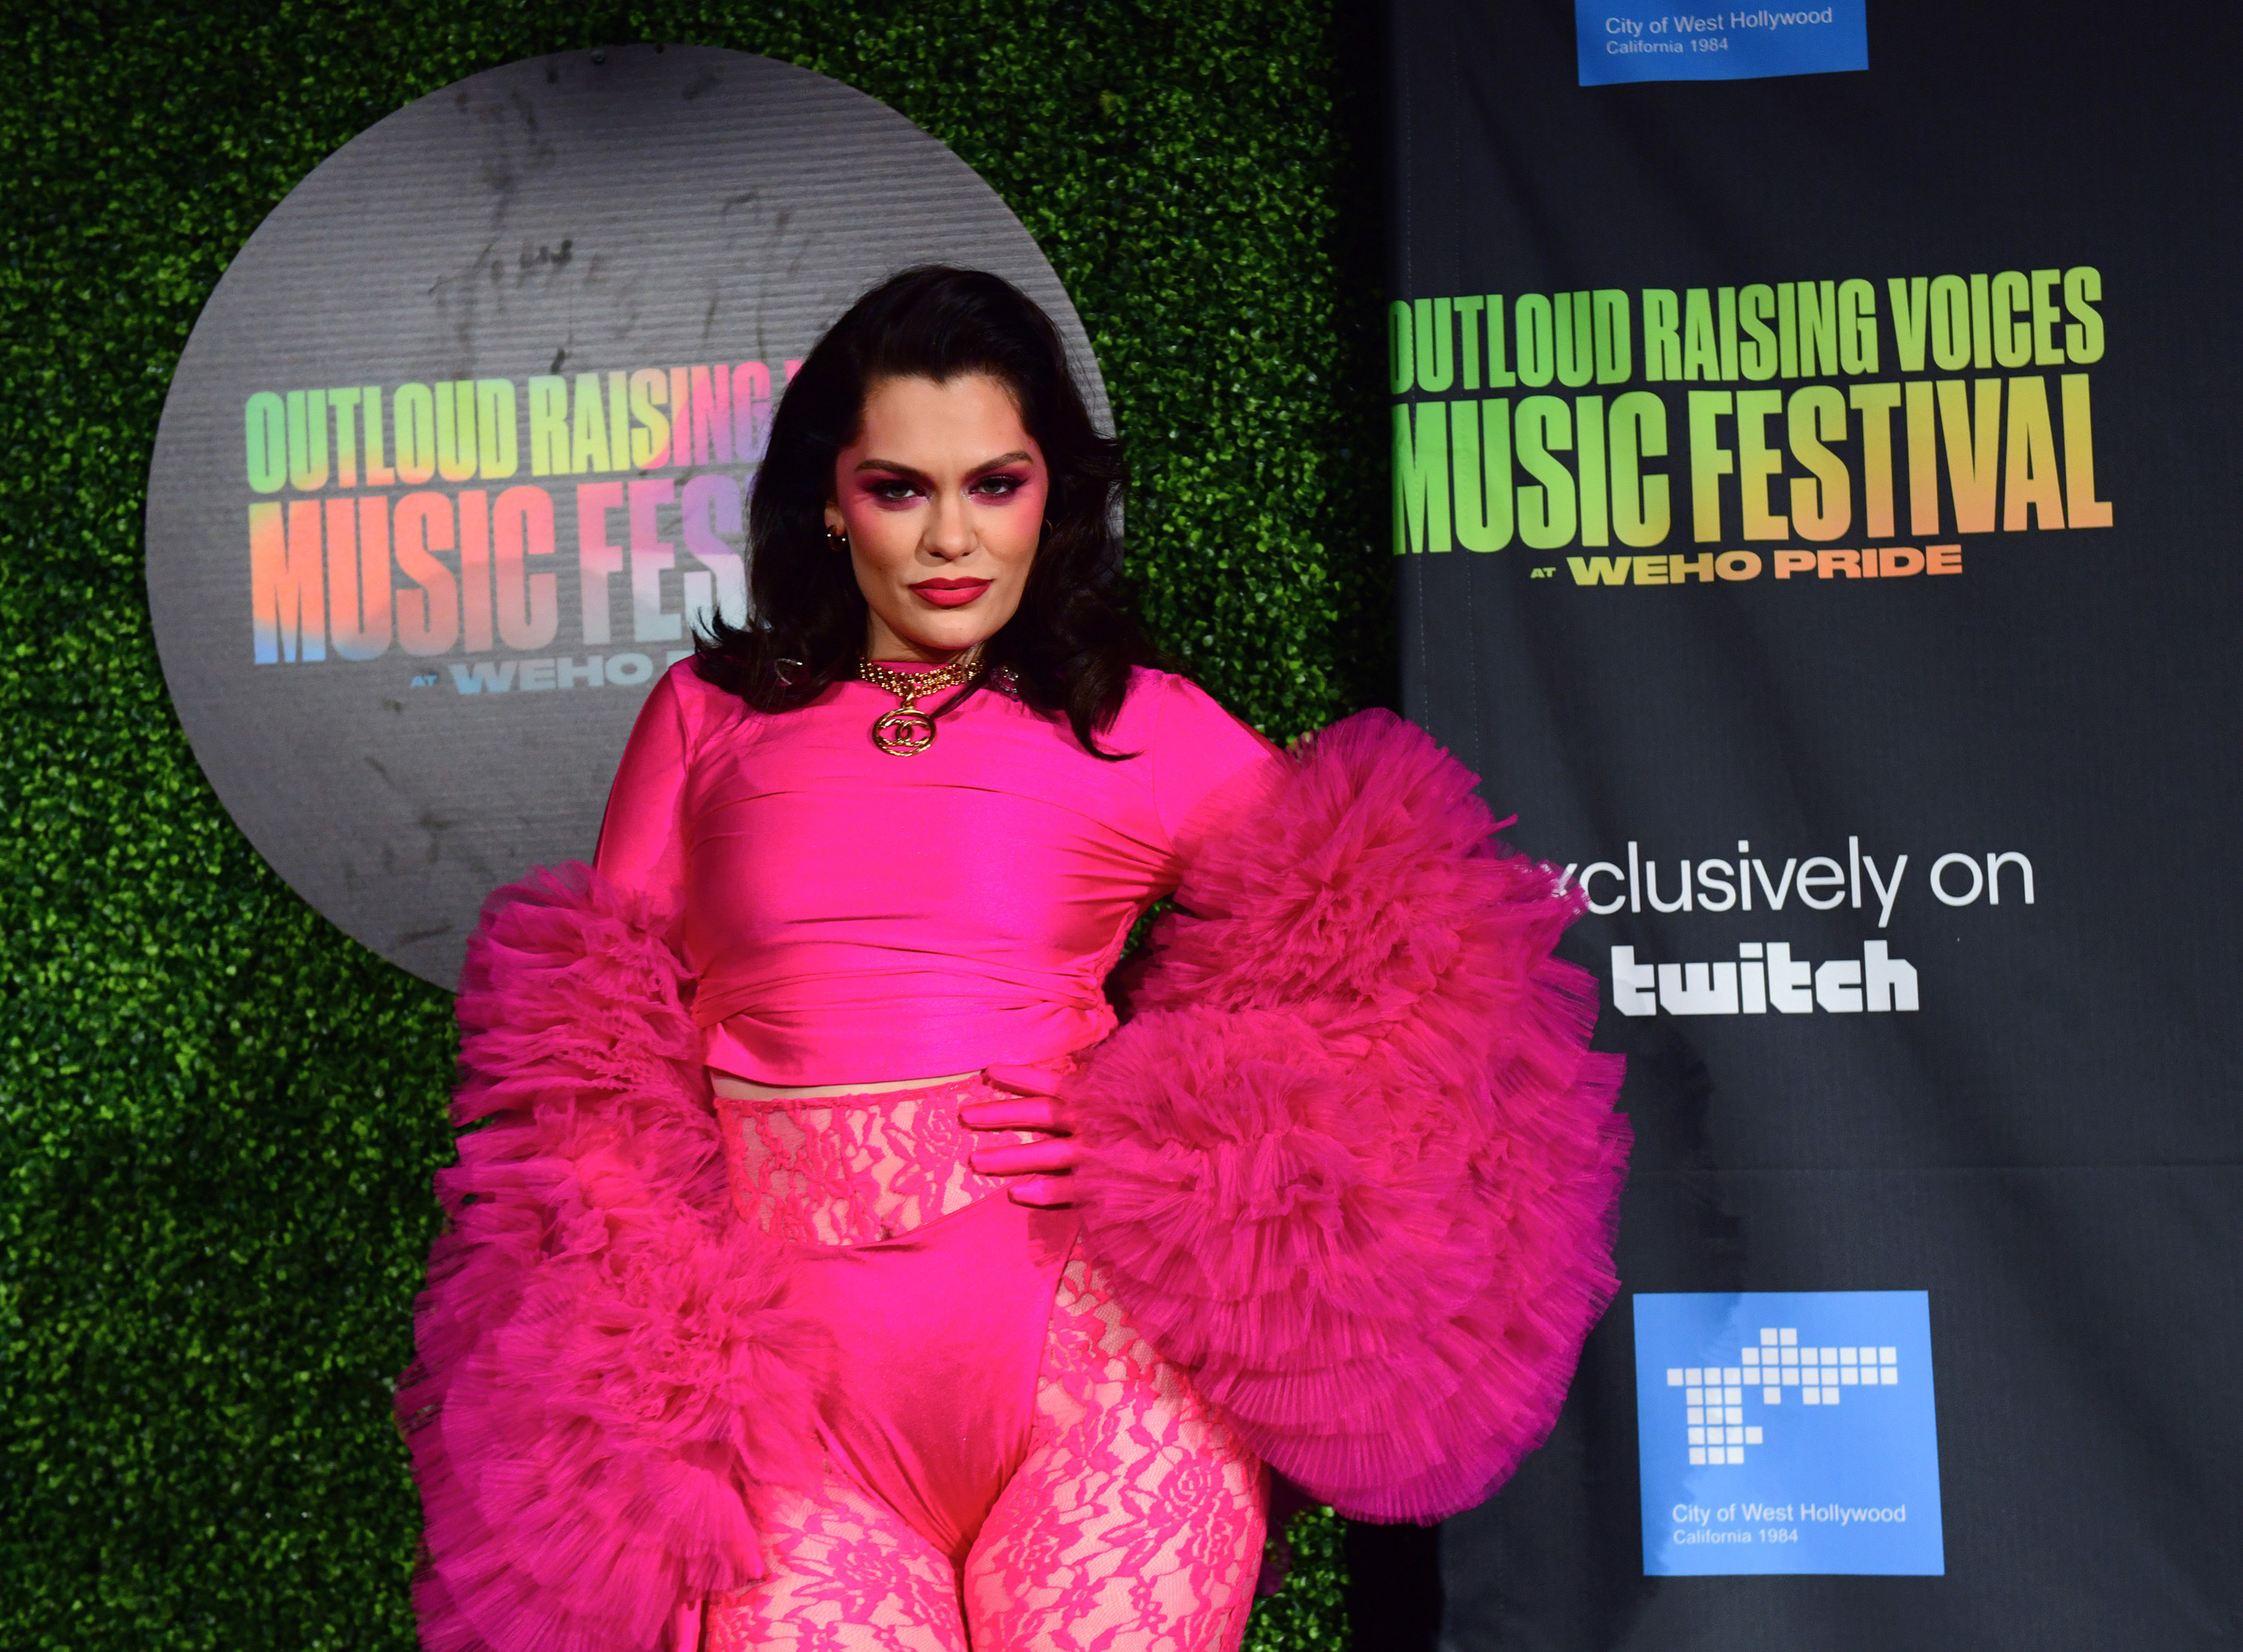 Jessie J wearing a bright pink outfit with large ruffled sleeves and matching dramatic pink eye make up